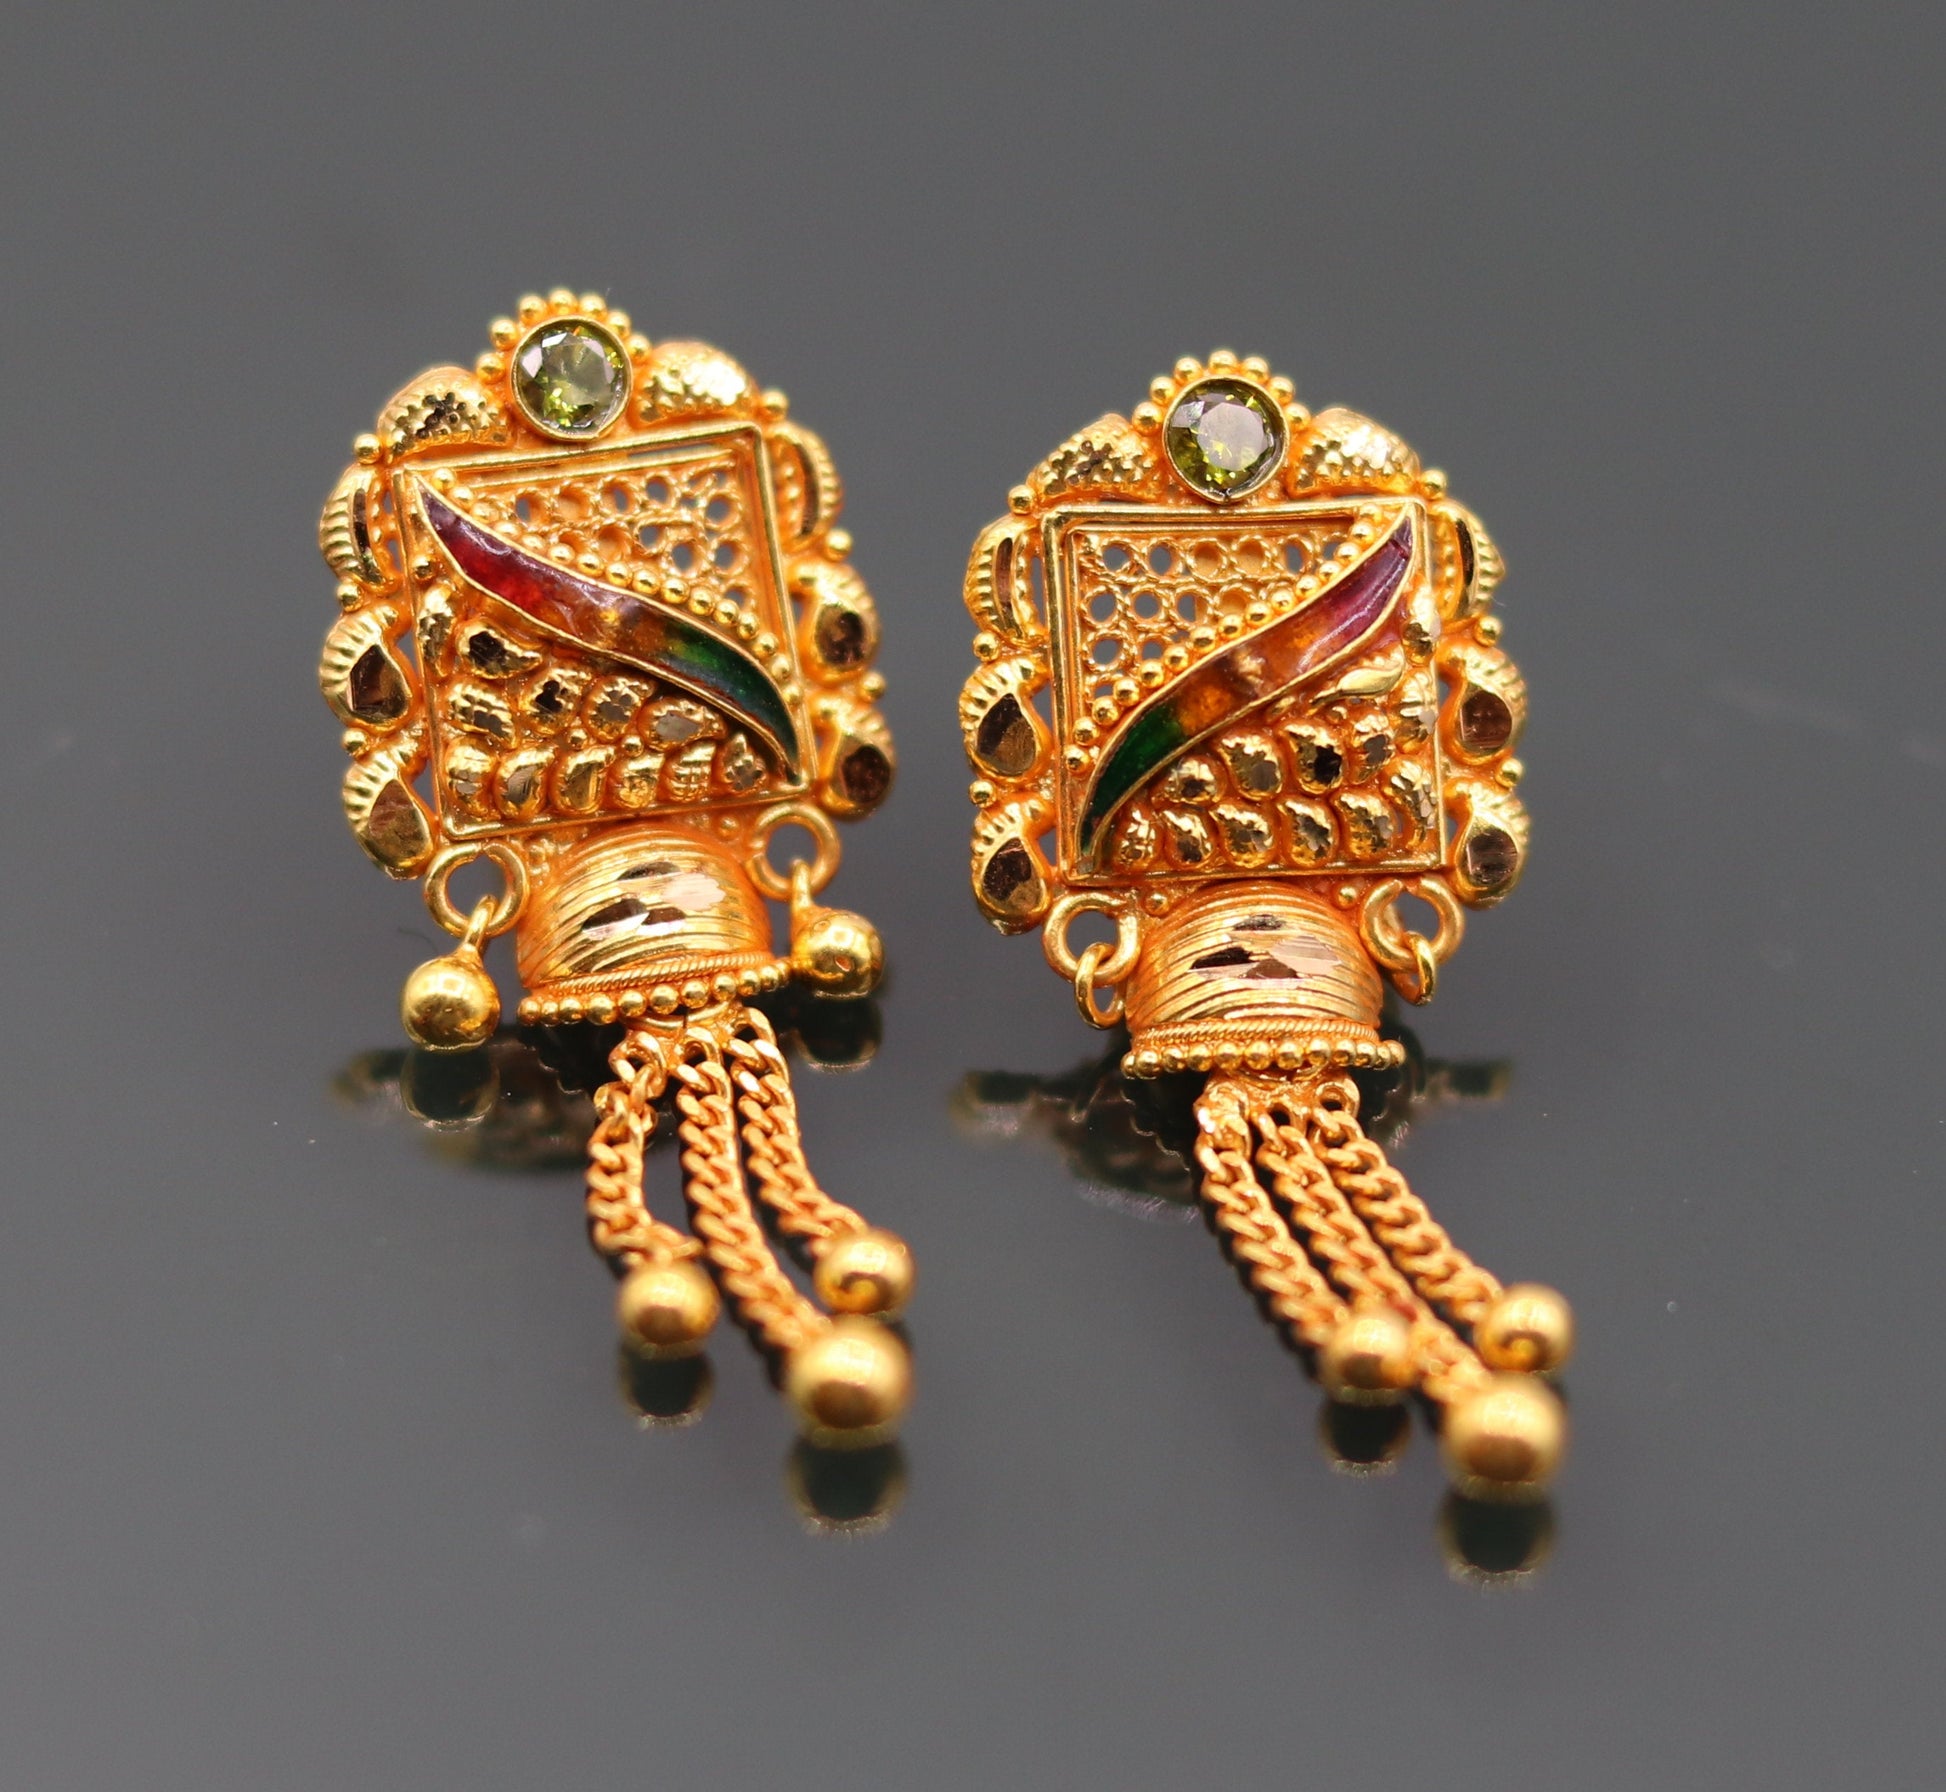 22kt yellow gold handmade filigree work antique style earrings pair drop dangle gorgeous wome's jewelry er92 - TRIBAL ORNAMENTS